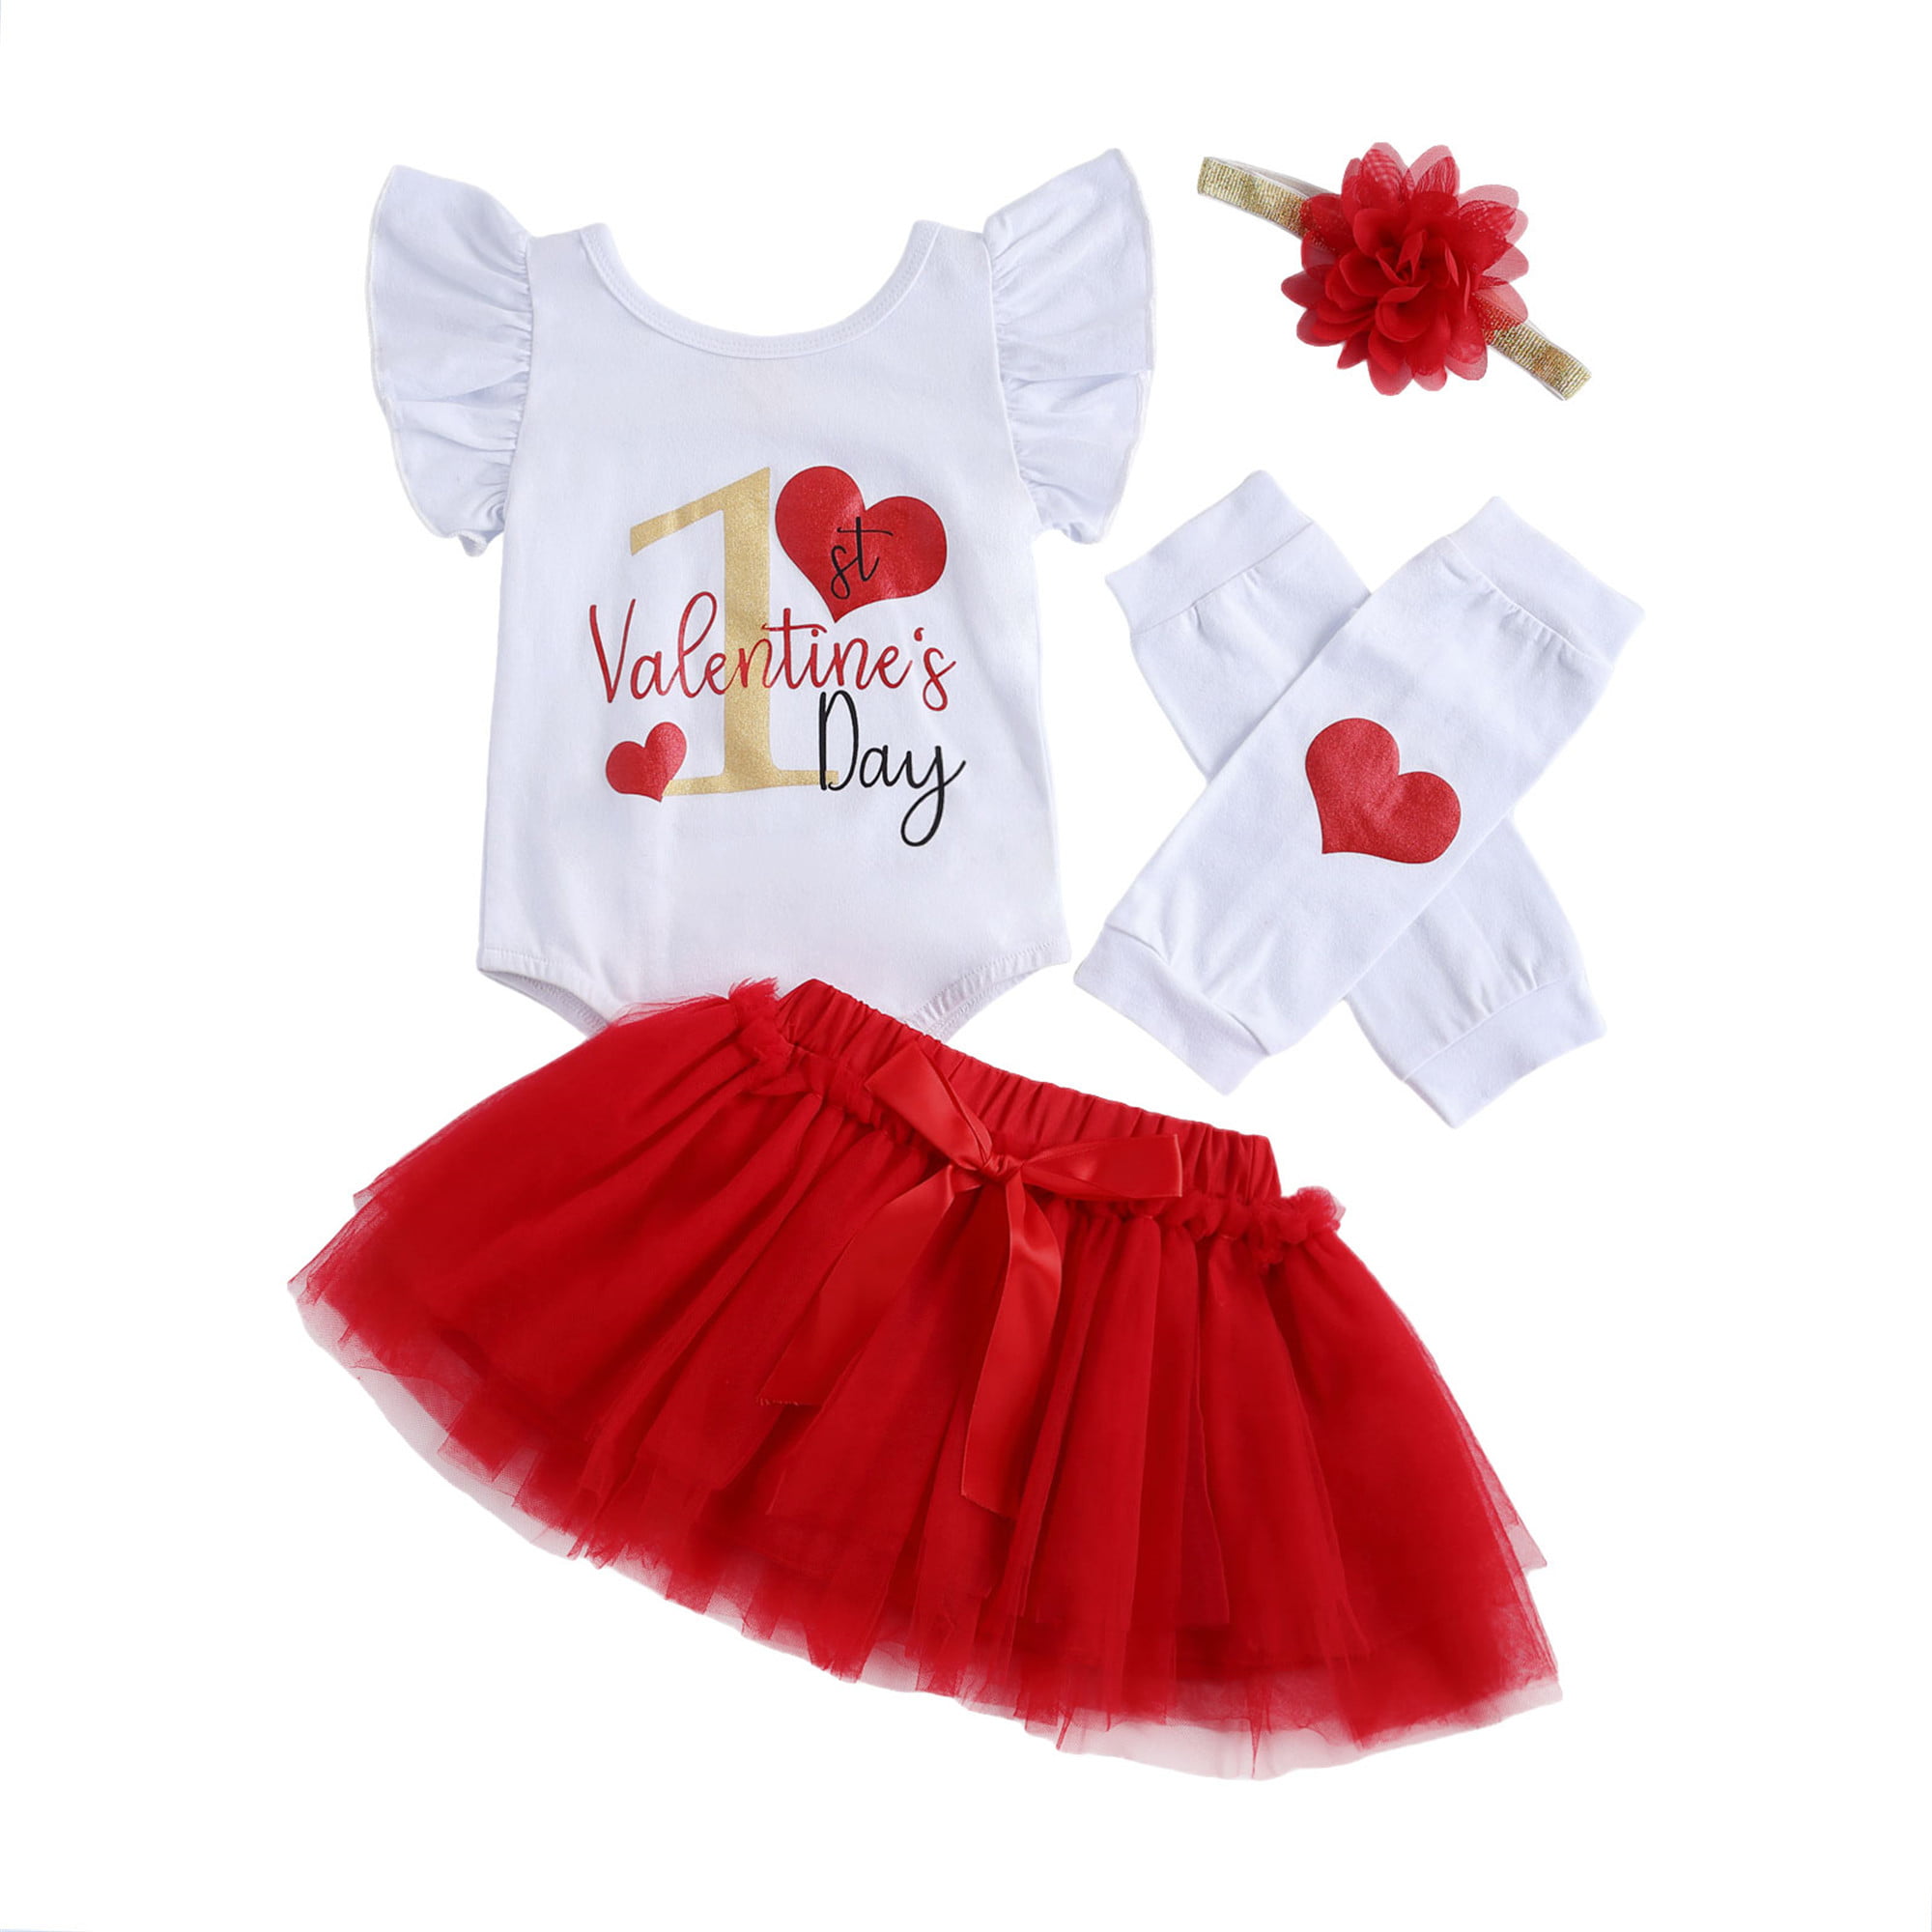 Toddler Infant Baby Girl Romper Tops+Tutu Skirts Valentine Headband Outfits HOT 